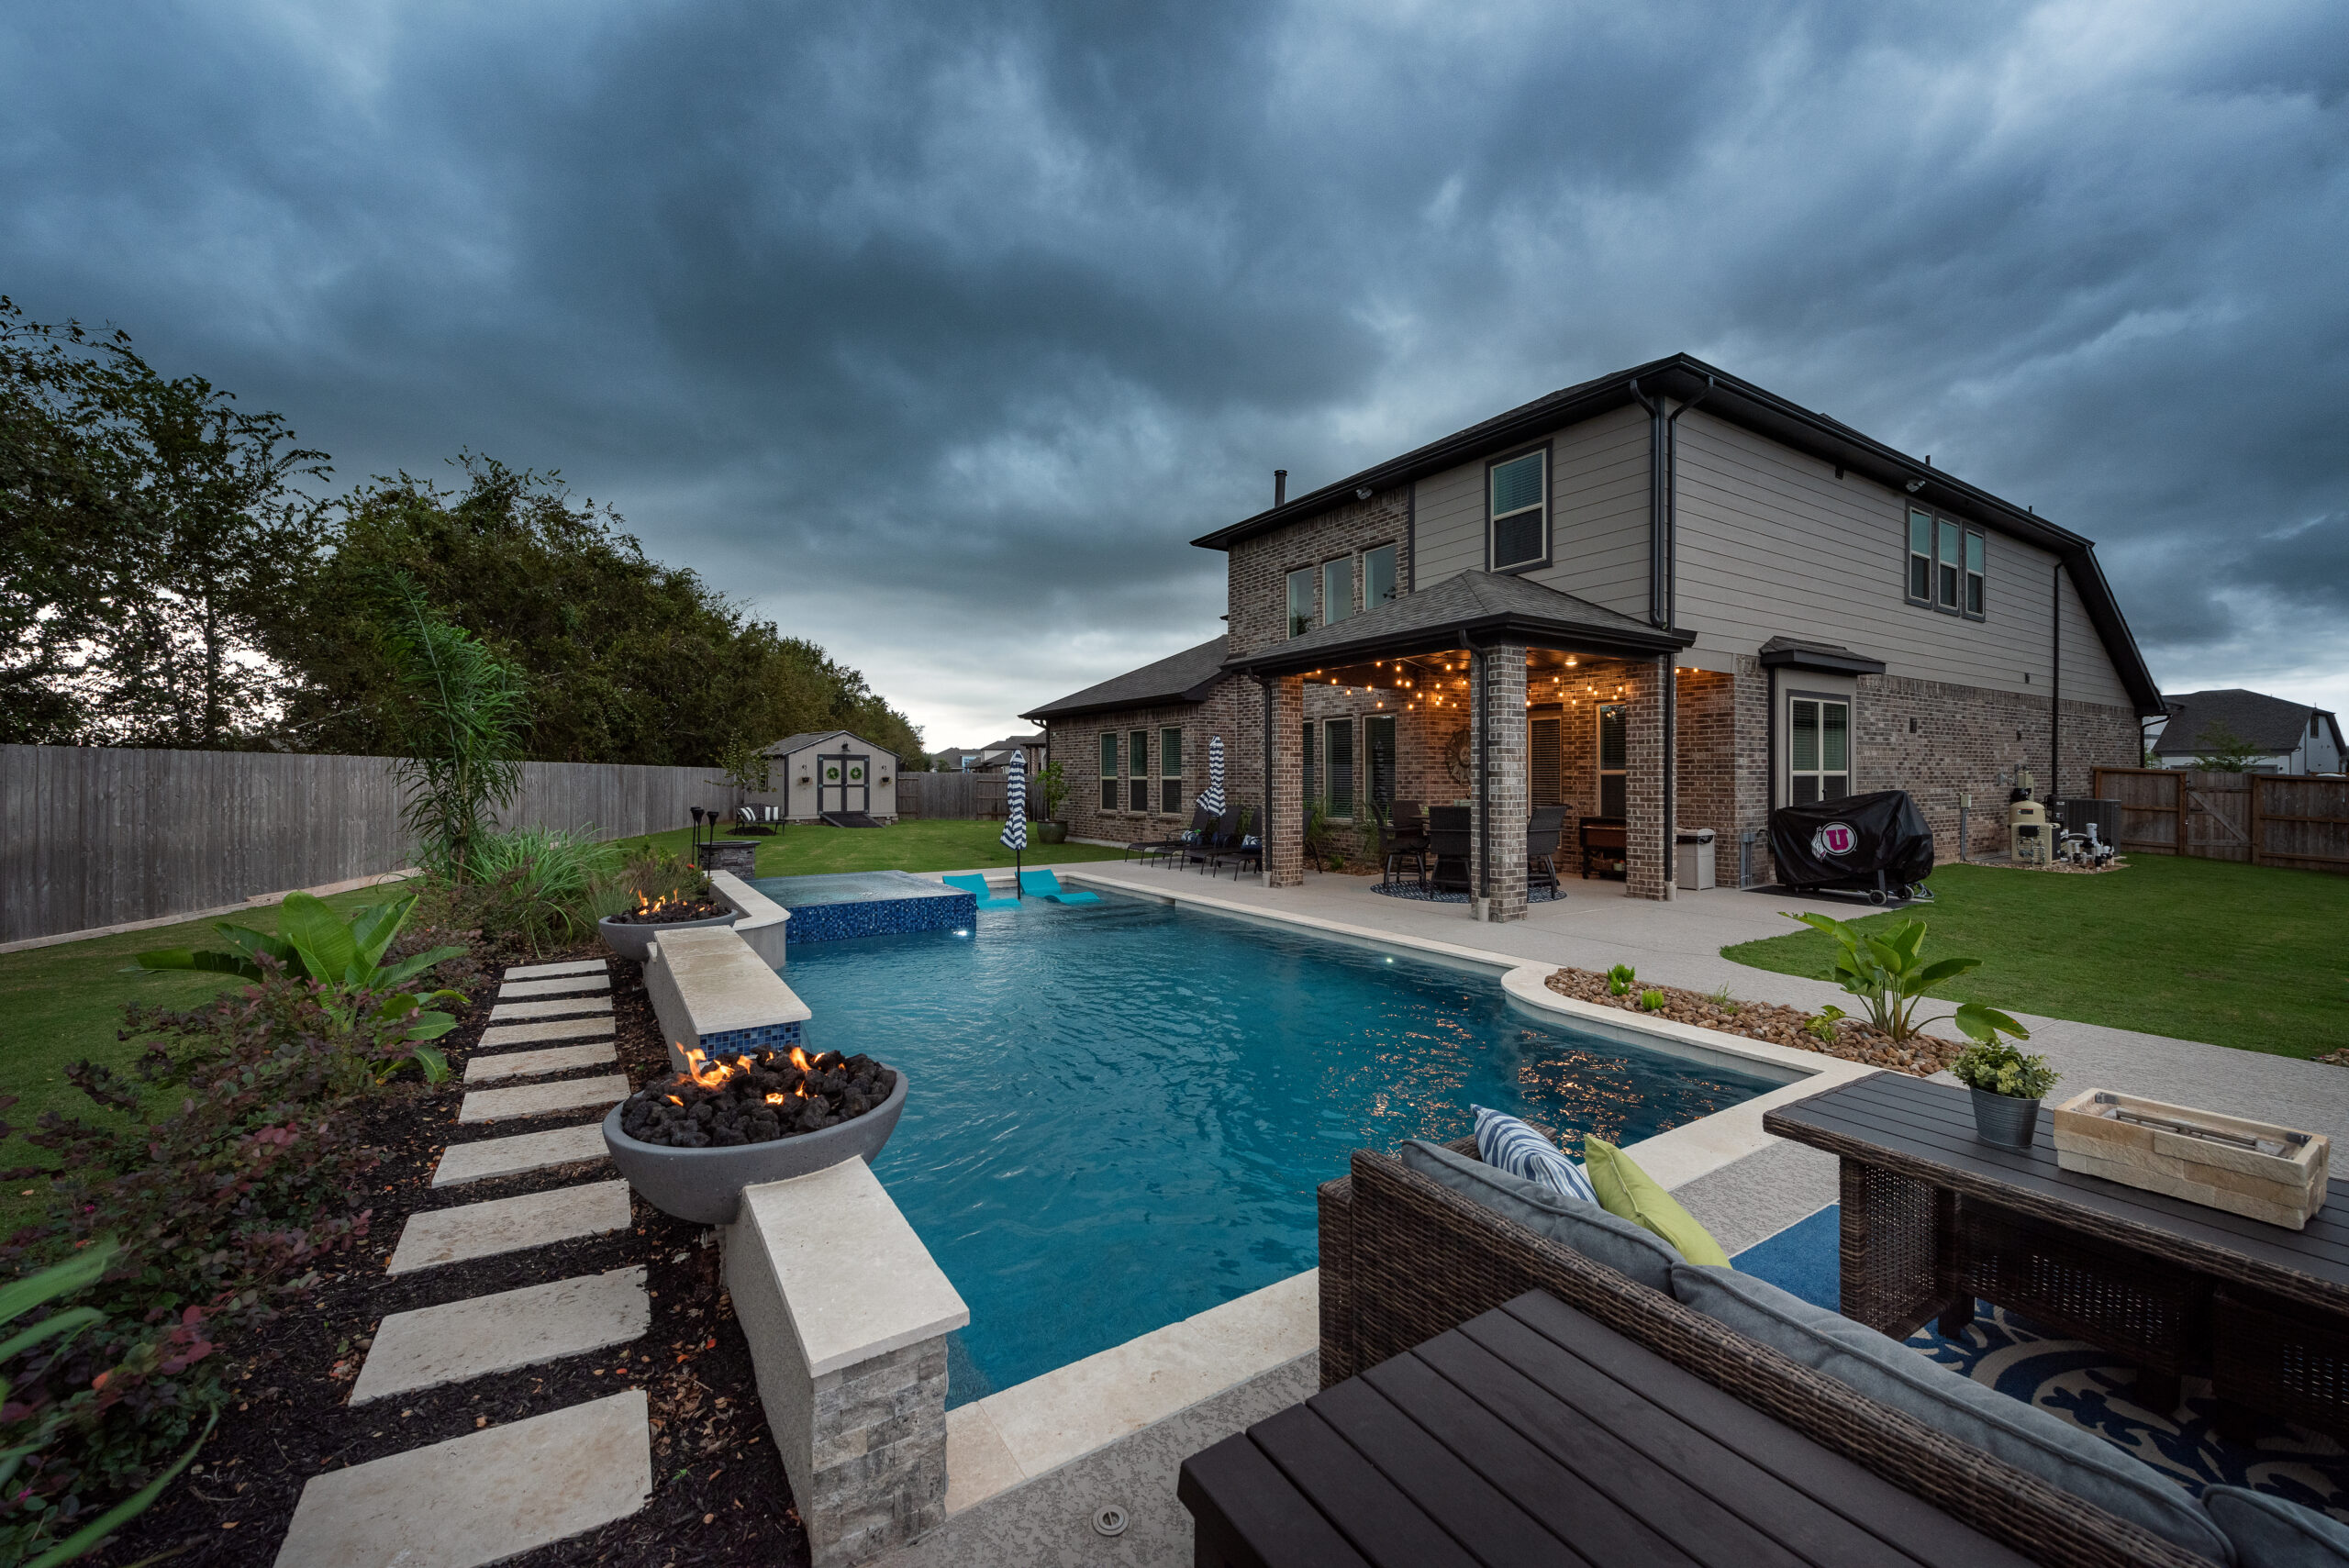 houston pool contractor - pool at dusk